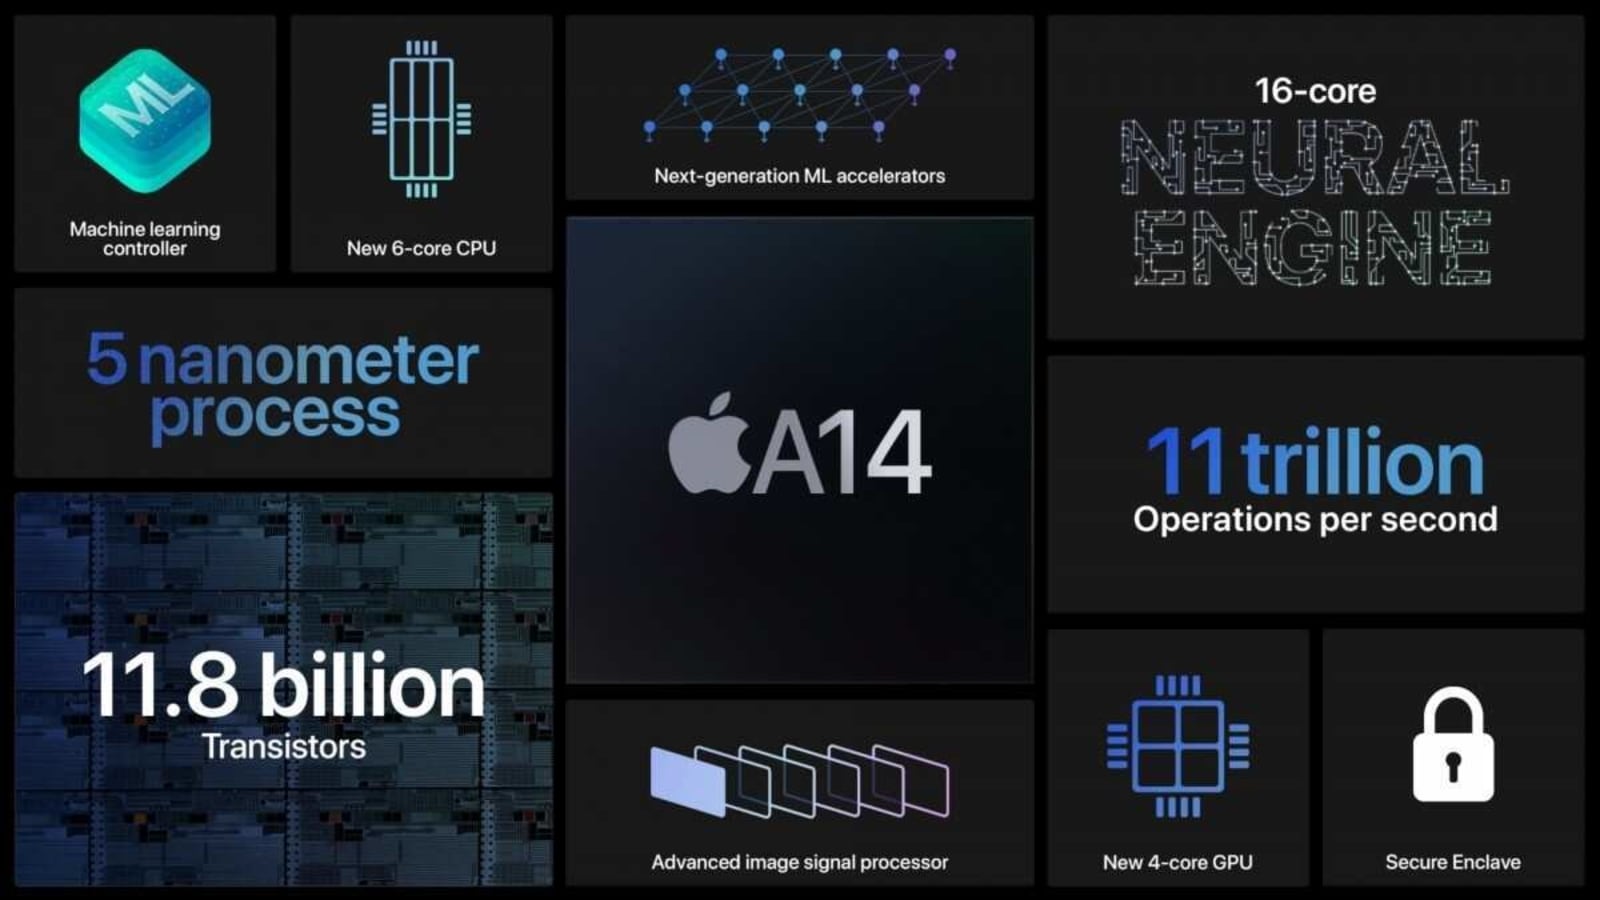 Apple's new A14 chip details indicate better battery life for upcoming iPhone 12 series | Tech News